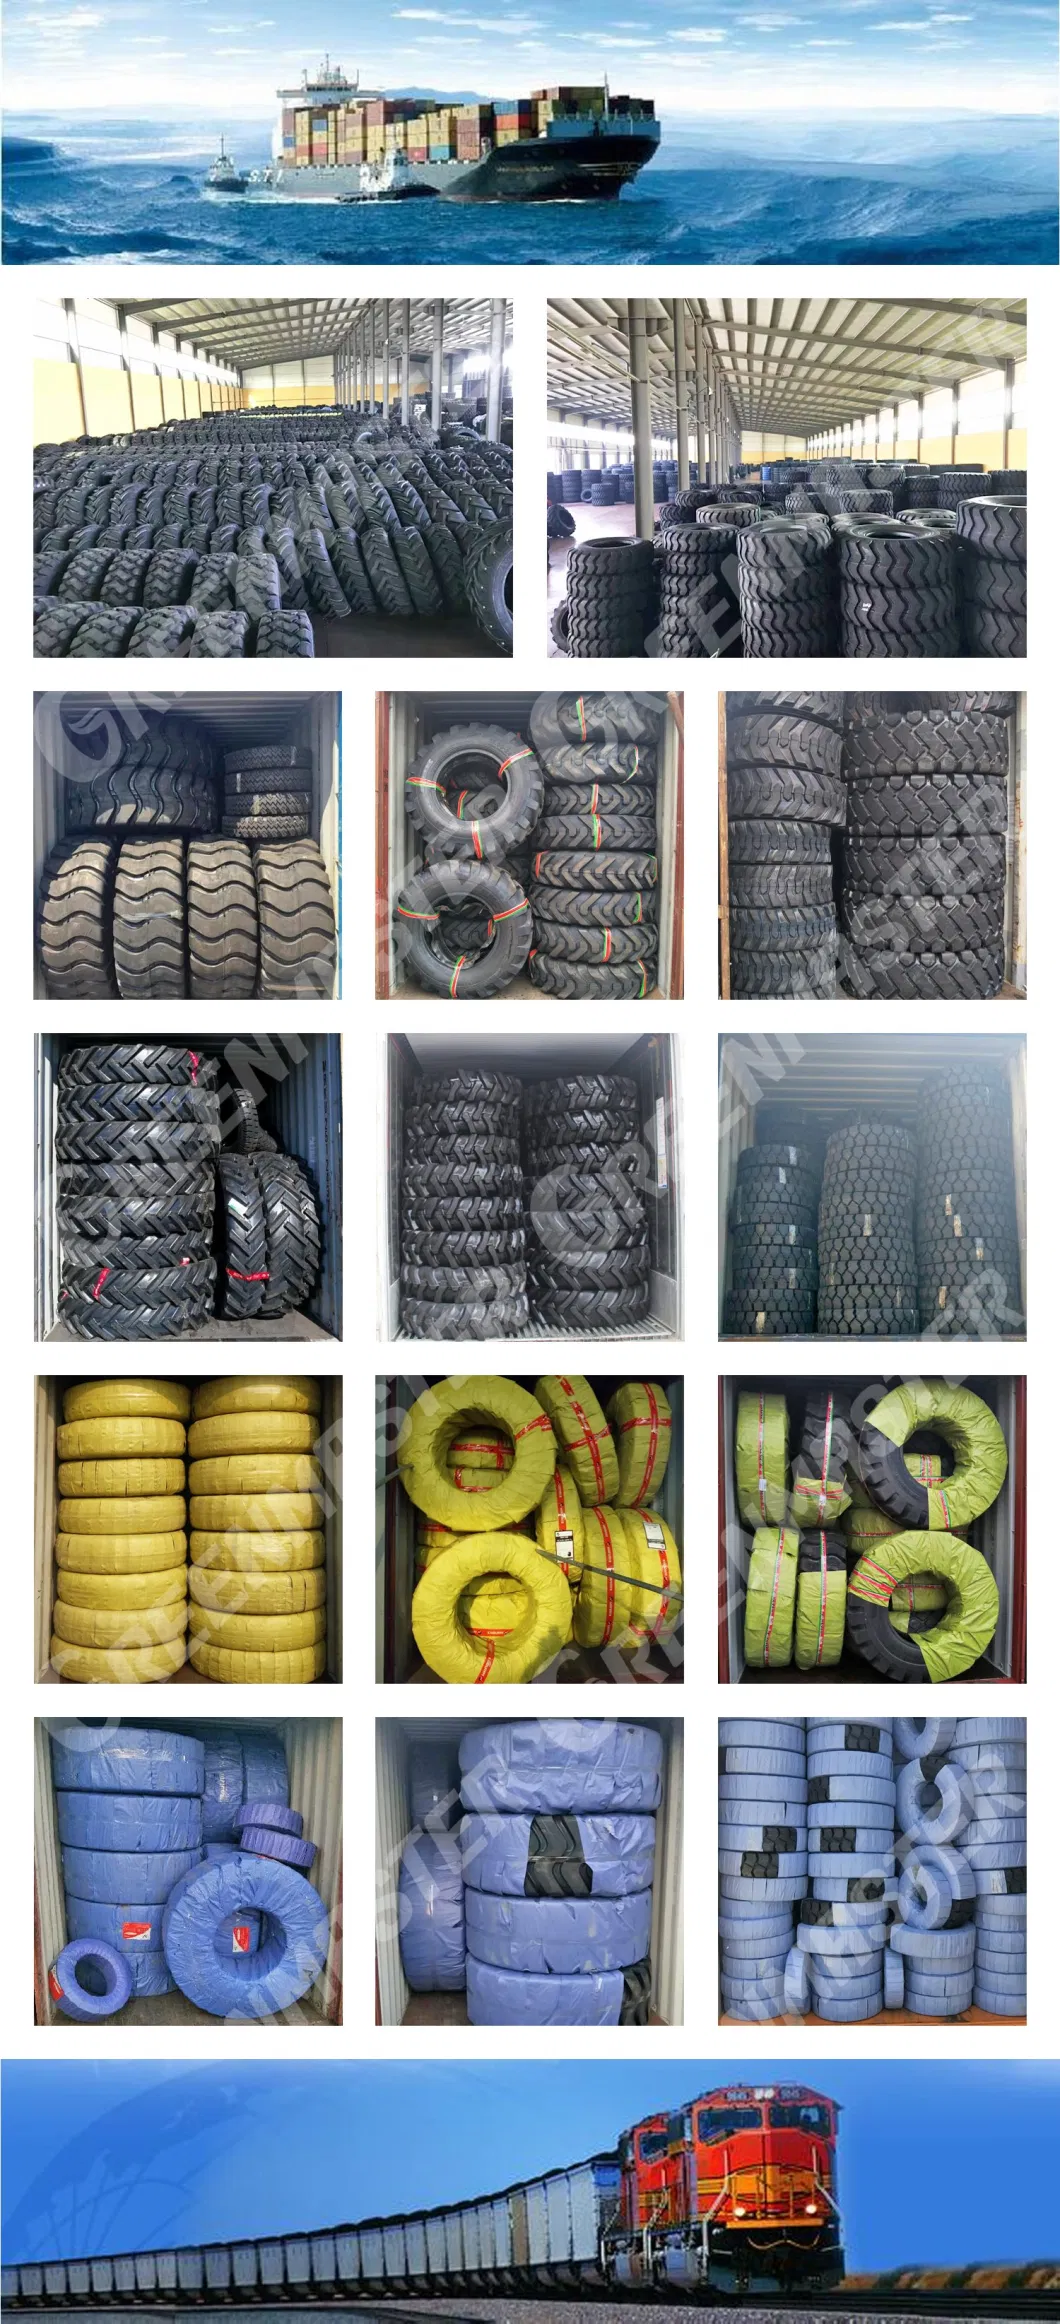 High Durability Press-on Bands (POB) Aerial Work Platform Solid Tyre, Polyurethane PU Foam Filled Tyre In385/65D19.5 In385/65D22.5 In445*55-19.5 In445/55D22.5